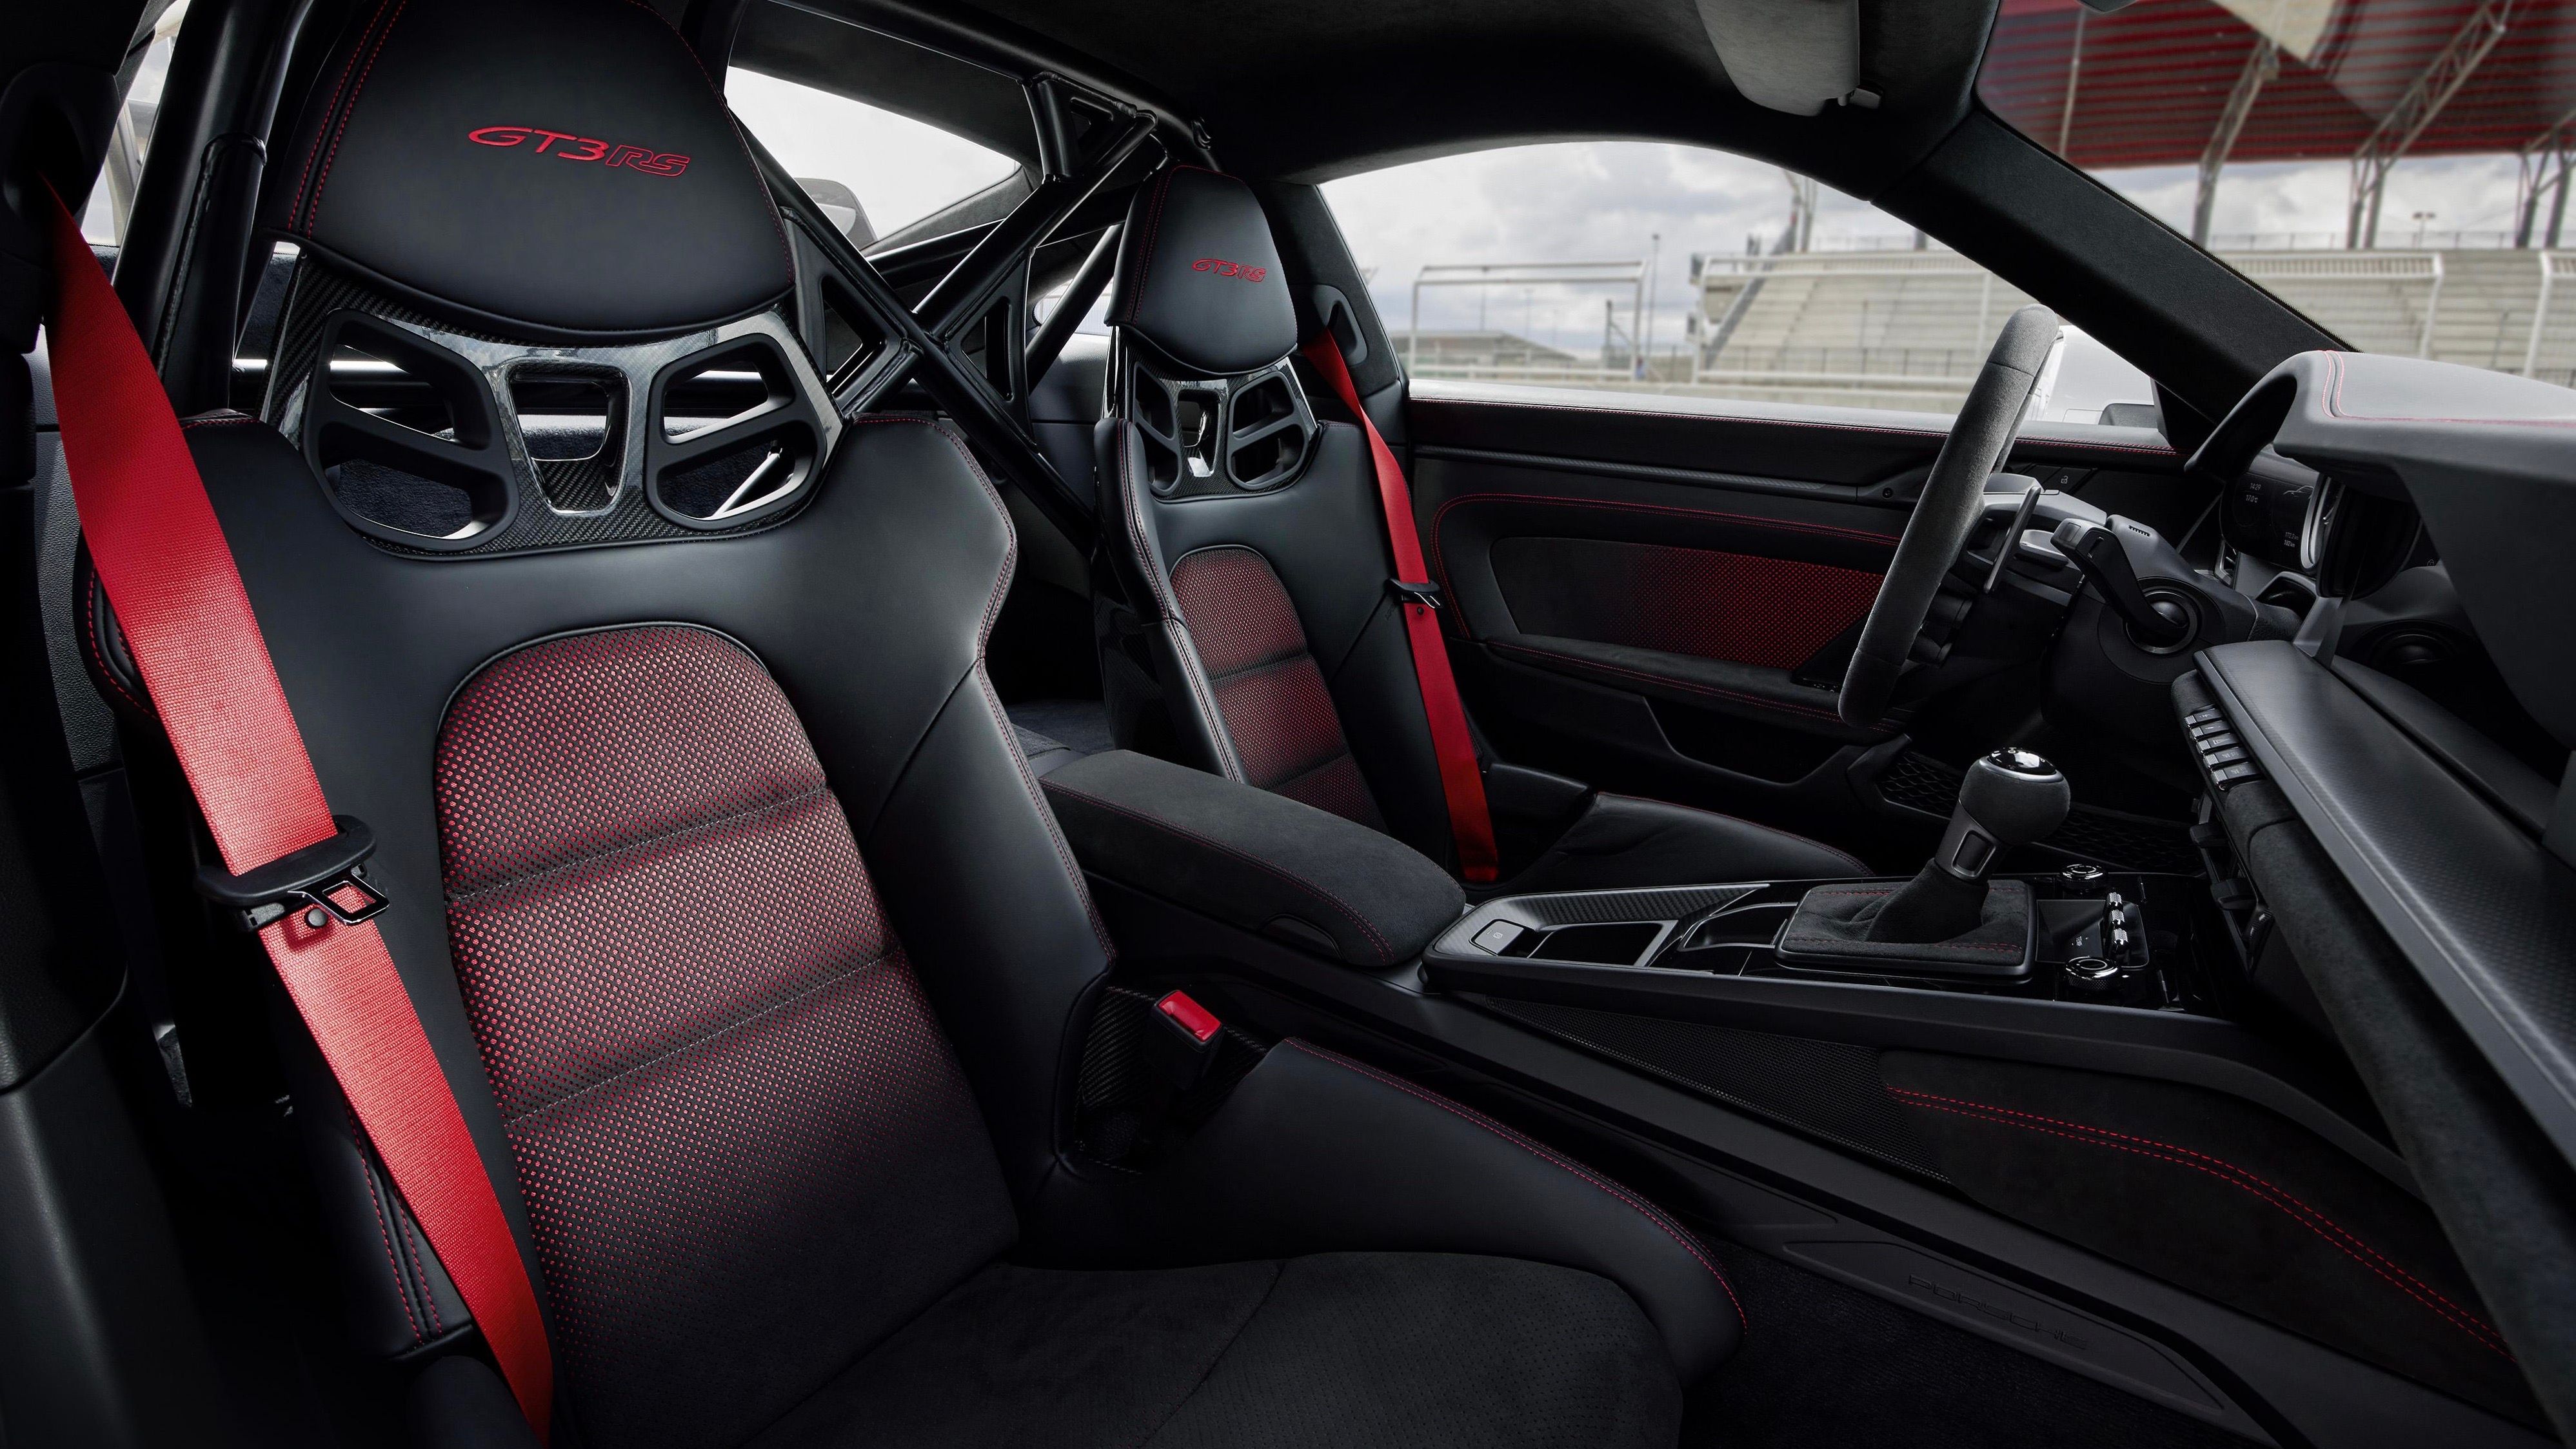 The seating inside the Porsche 911 GT3 RS.